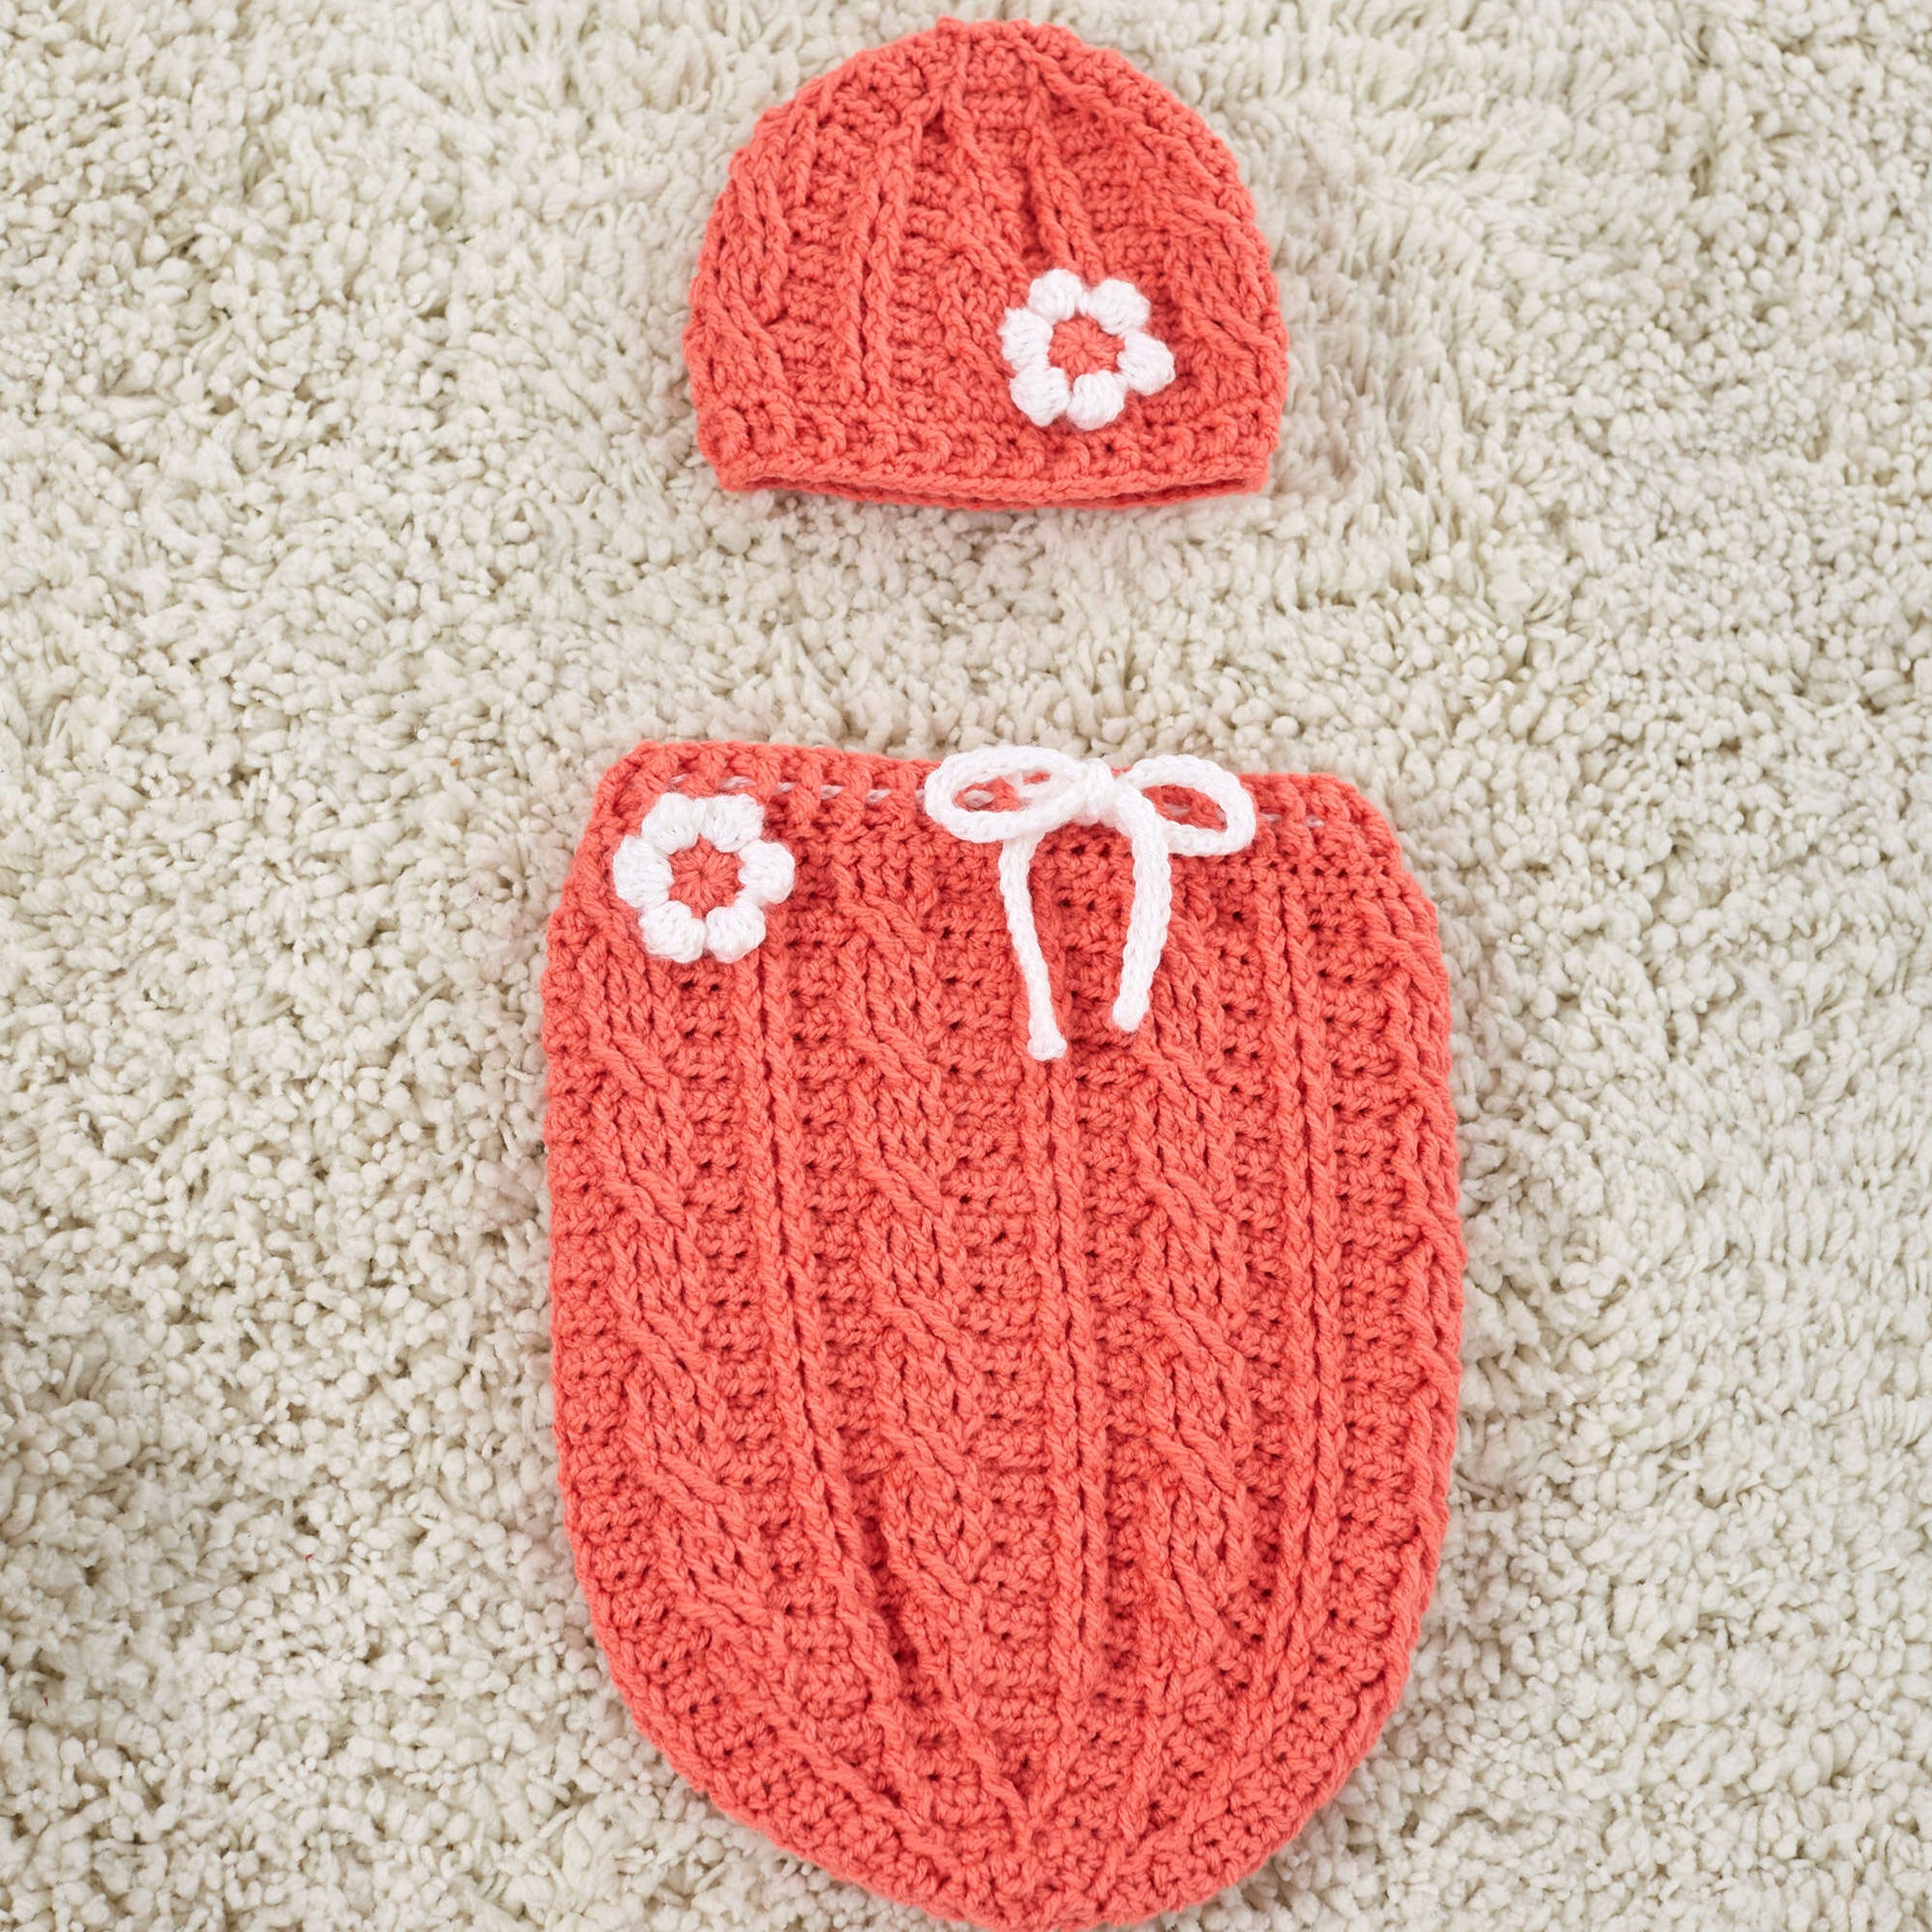 Free Red Heart Crochet Just Peachie Cocoon Set Pattern